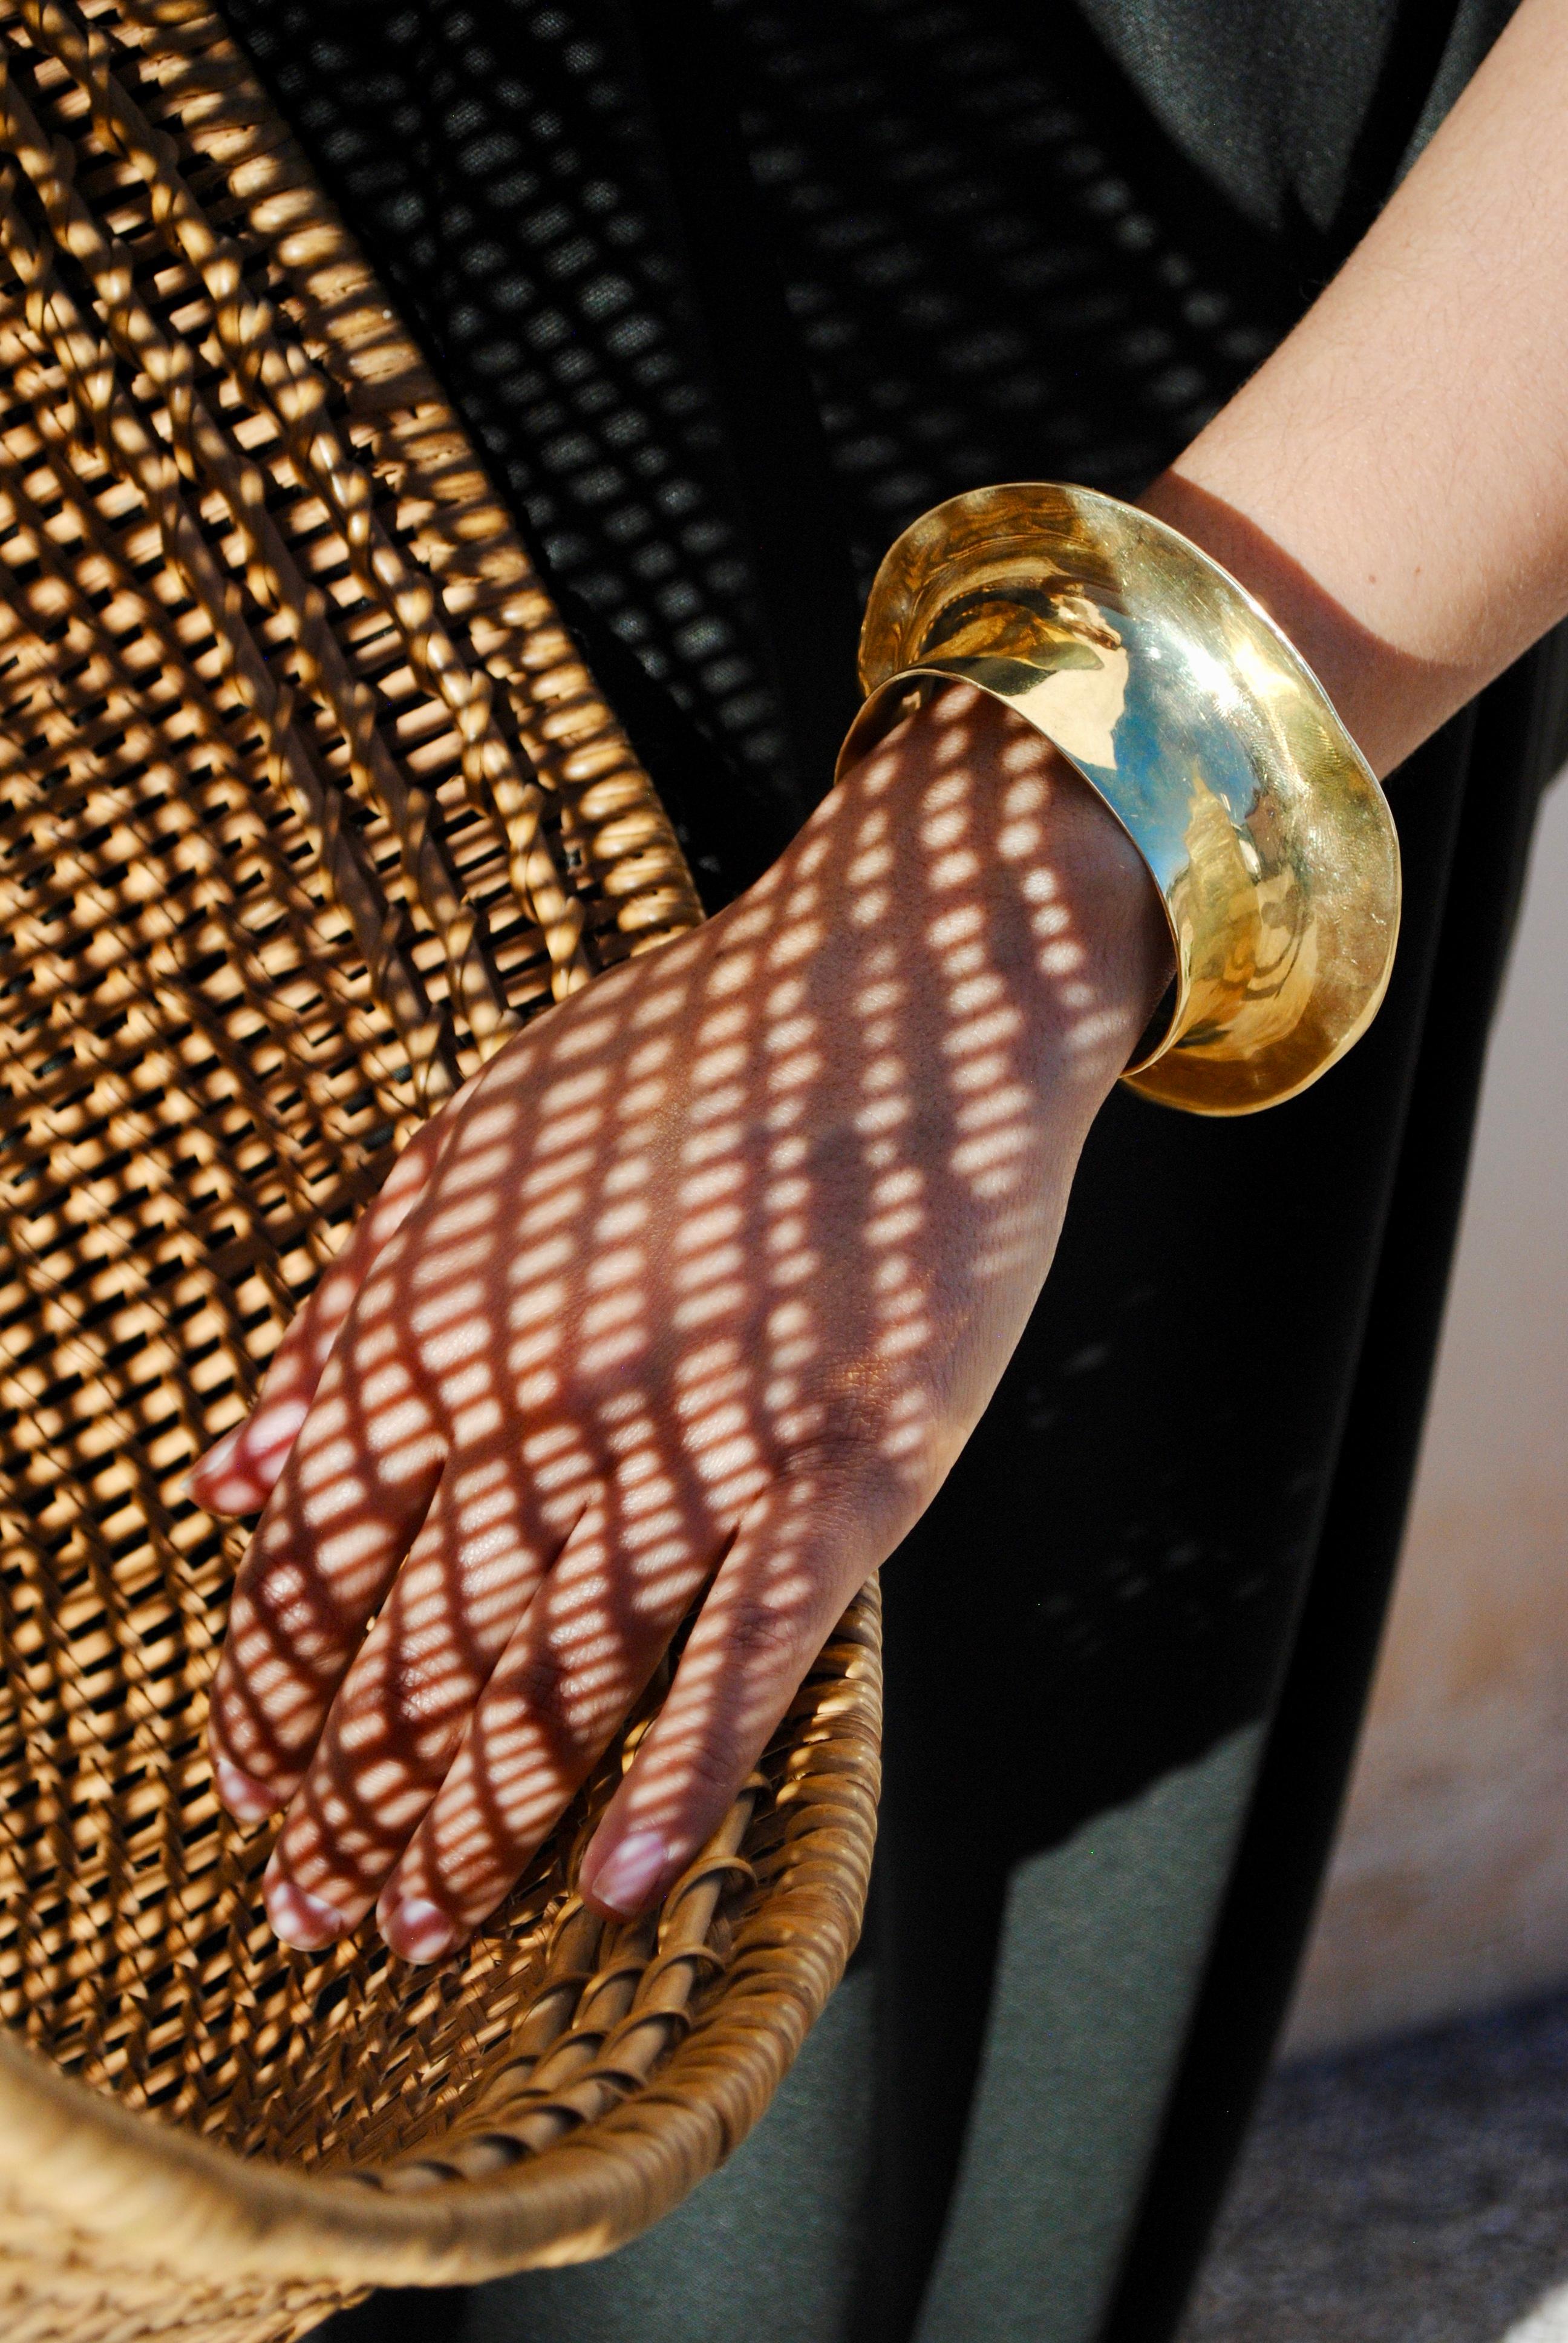 Our Despina cuff has become the signature piece of our collection. The first piece of jewelry Ariana carved from a block of wax before there was even a collection. It was inspired by Mayan Gold from the Met Museum in New York. It represents a strong